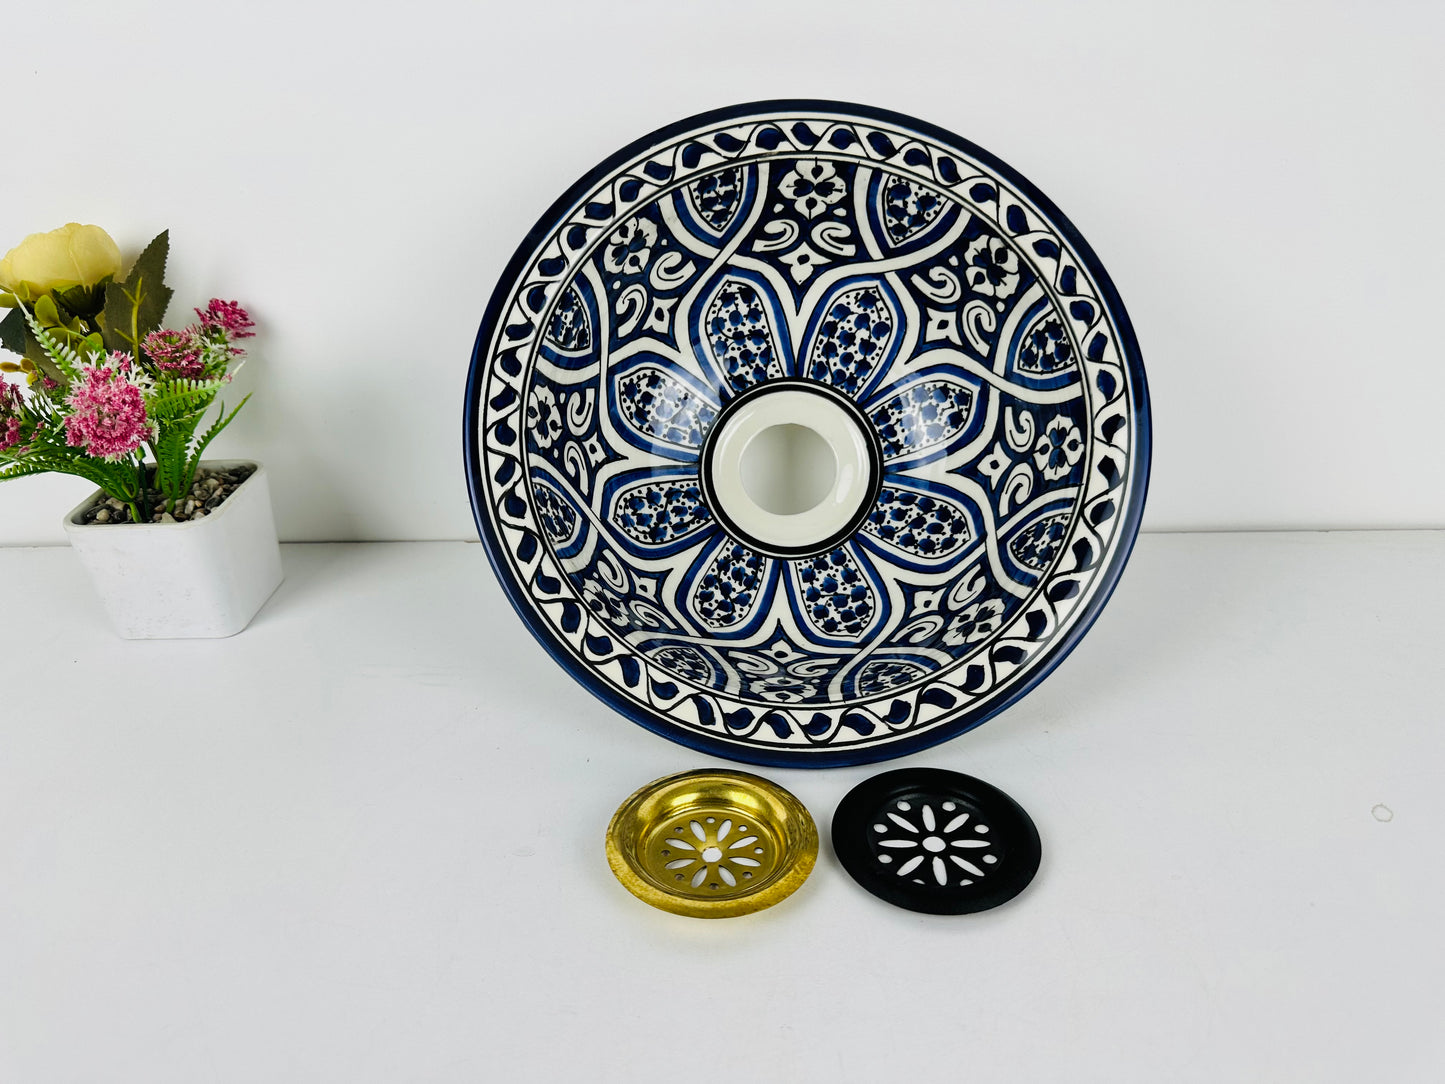 Blooming Blue: Handcrafted Ceramic Sink with Floral Design in Blue